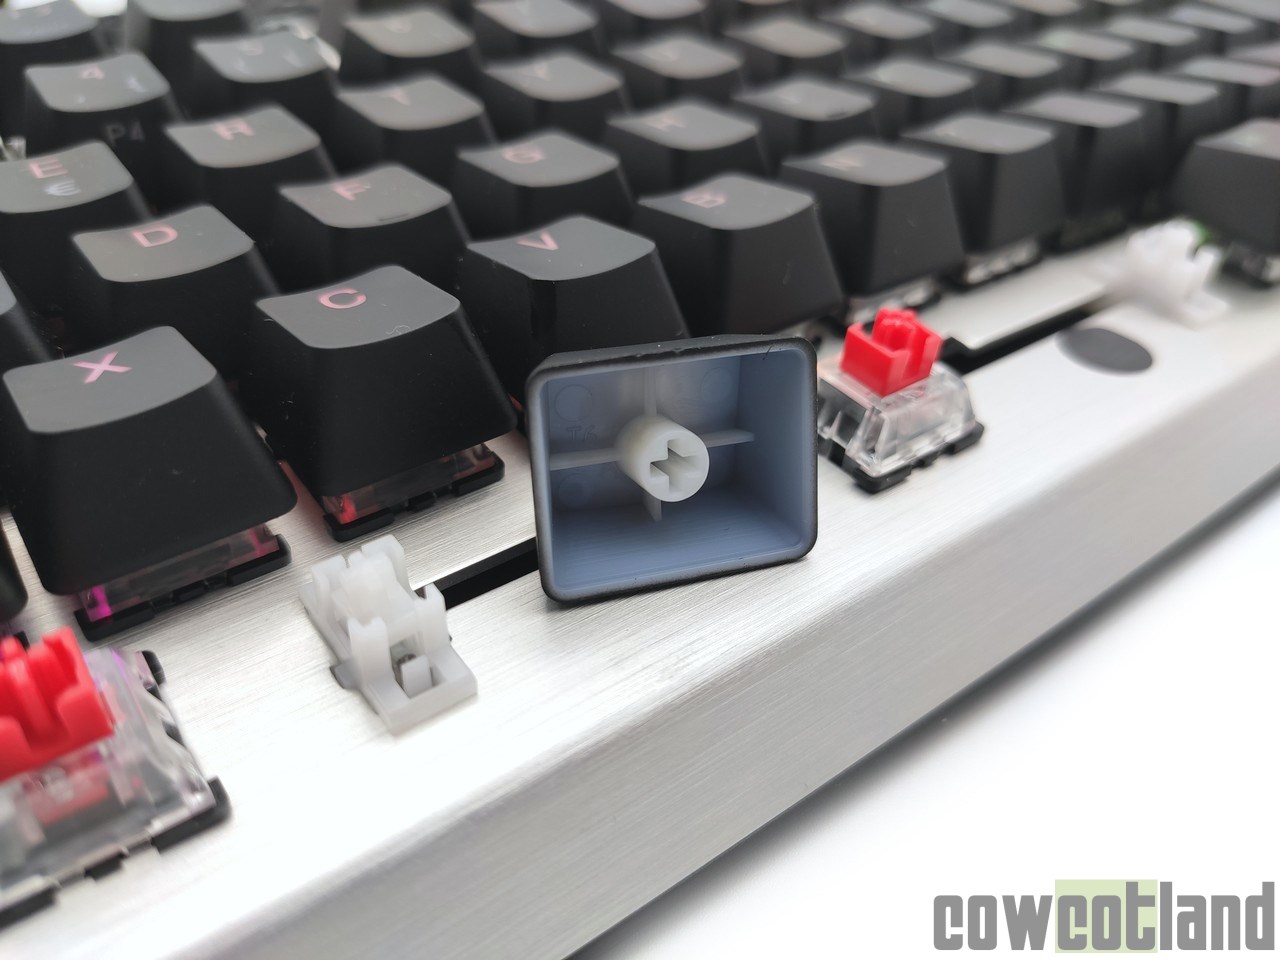 Image 46357, galerie Test clavier mcanique Cooler Master CK351 : switches optiques et hot-swappables !